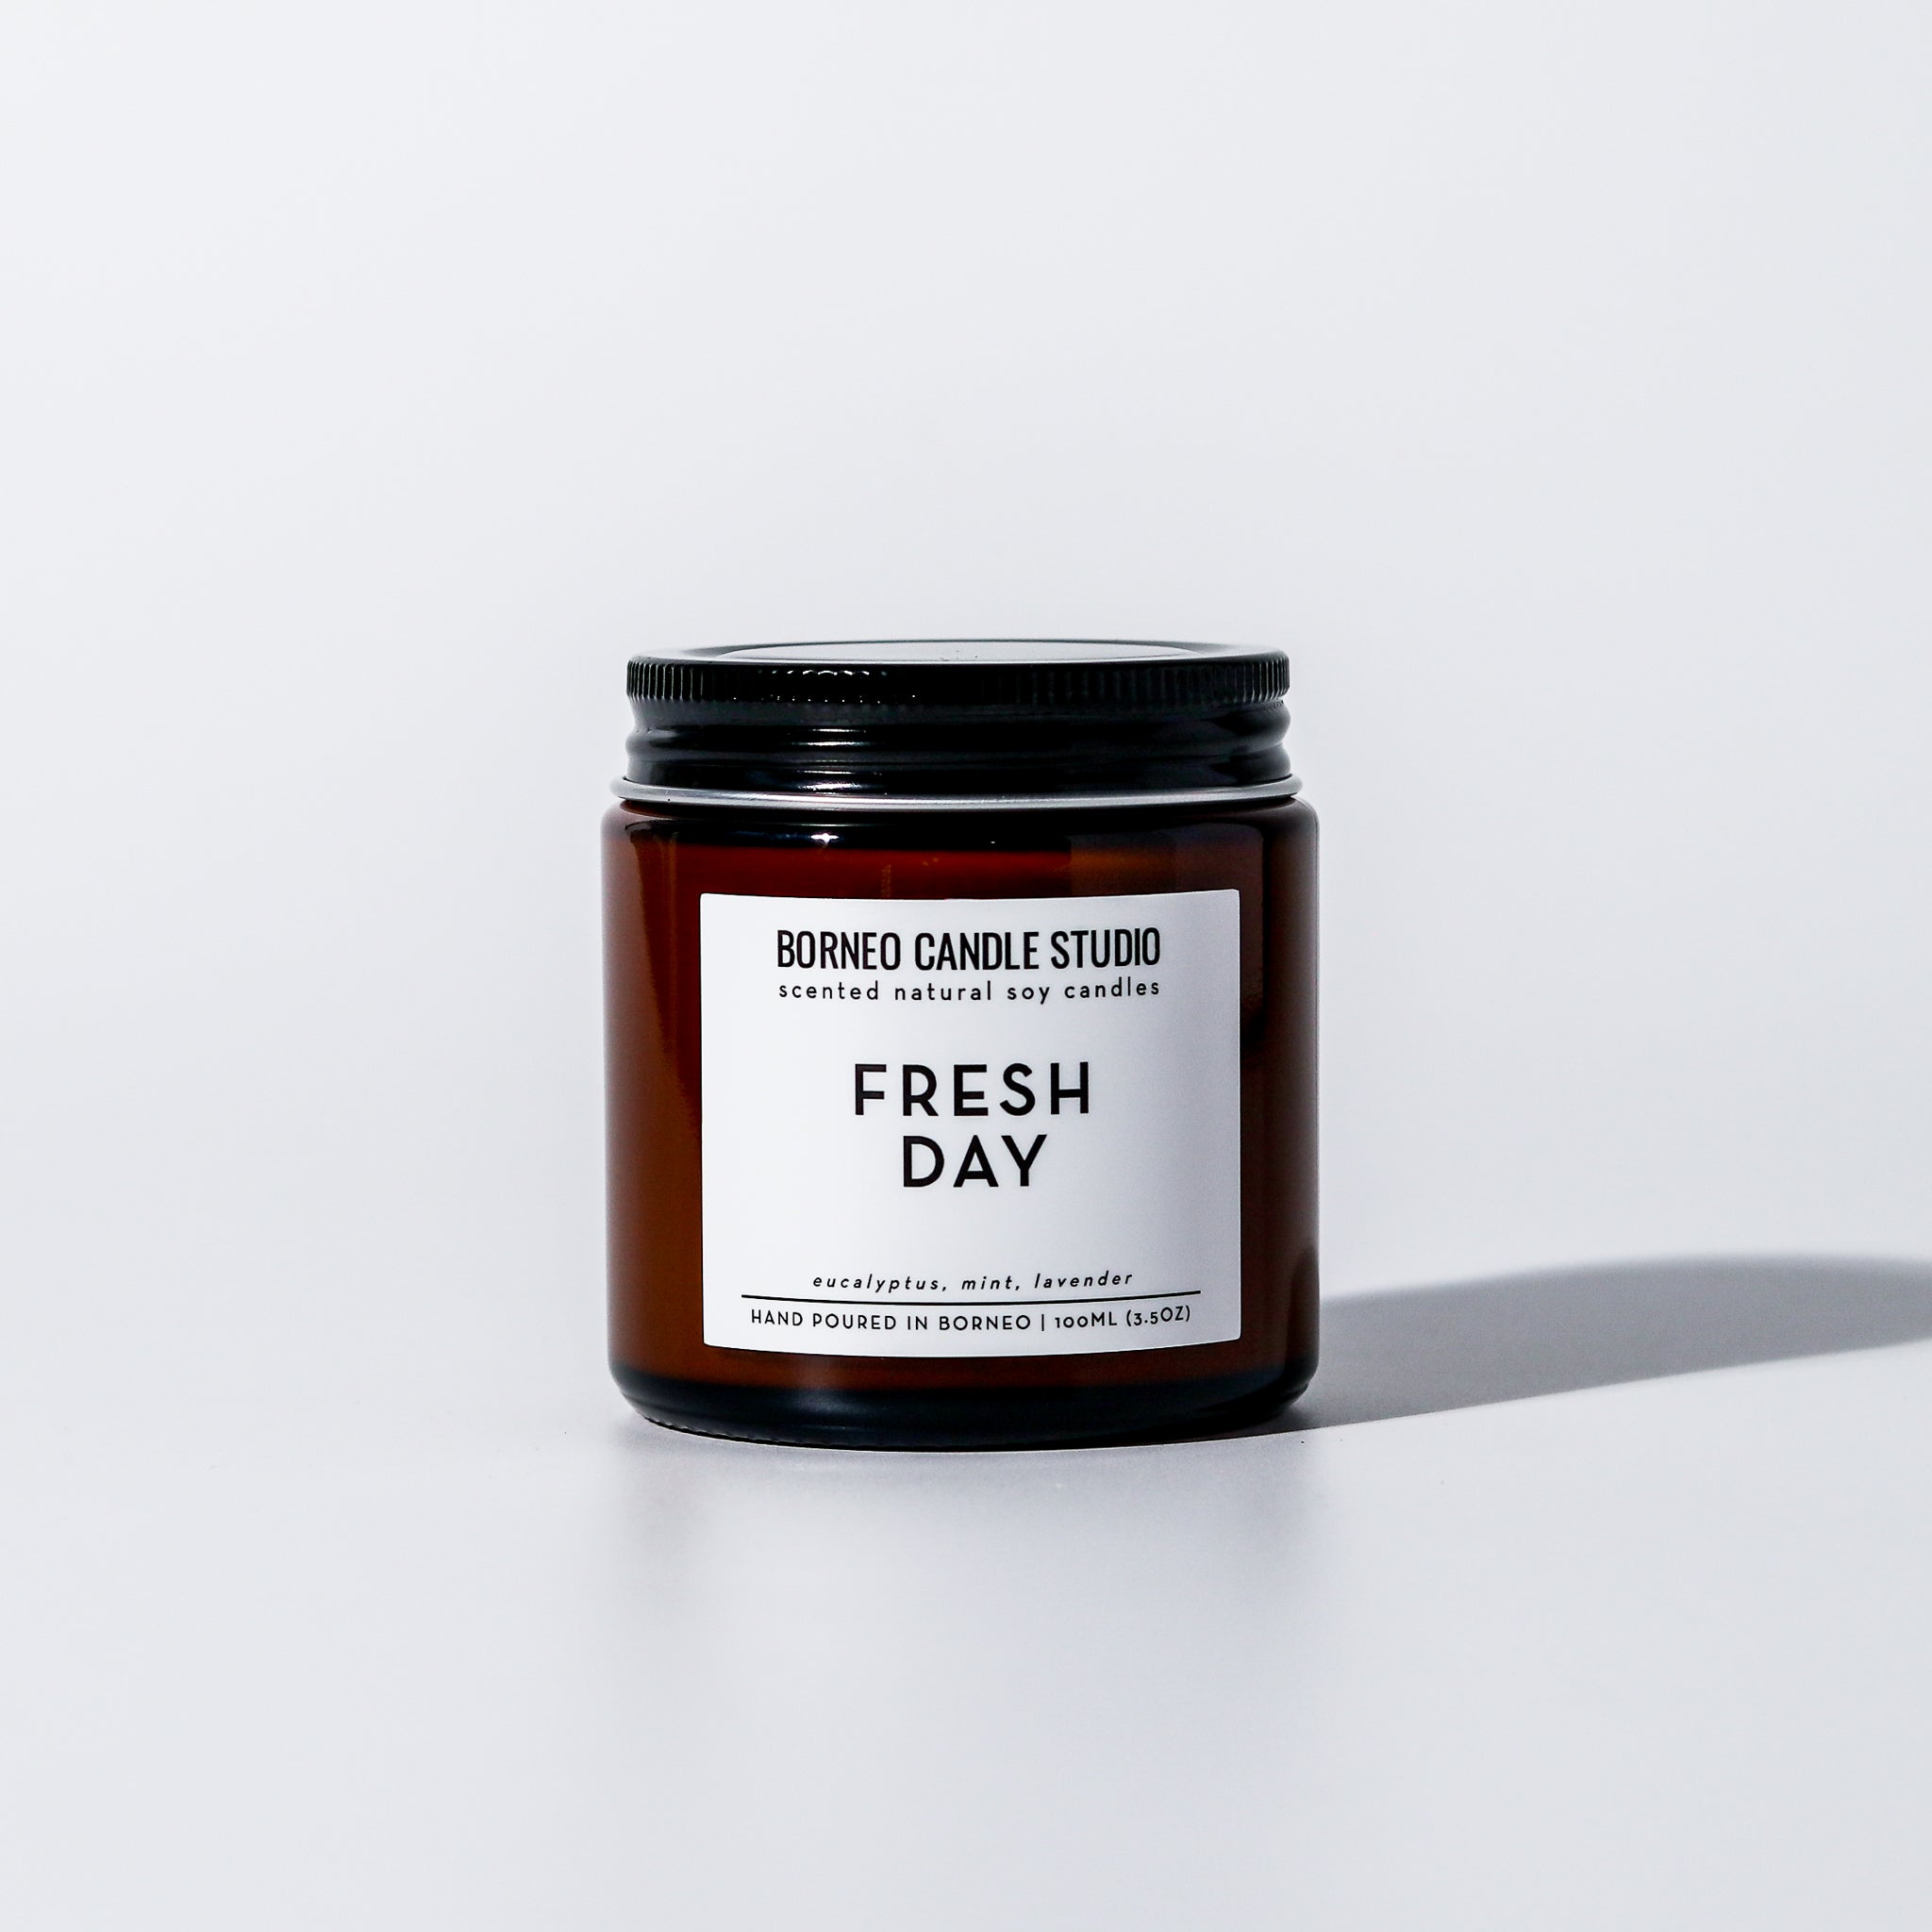 Fresh Day Scented Candle - eucalyptus, mint, lavender in 3.5 oz amber glass jar with lid